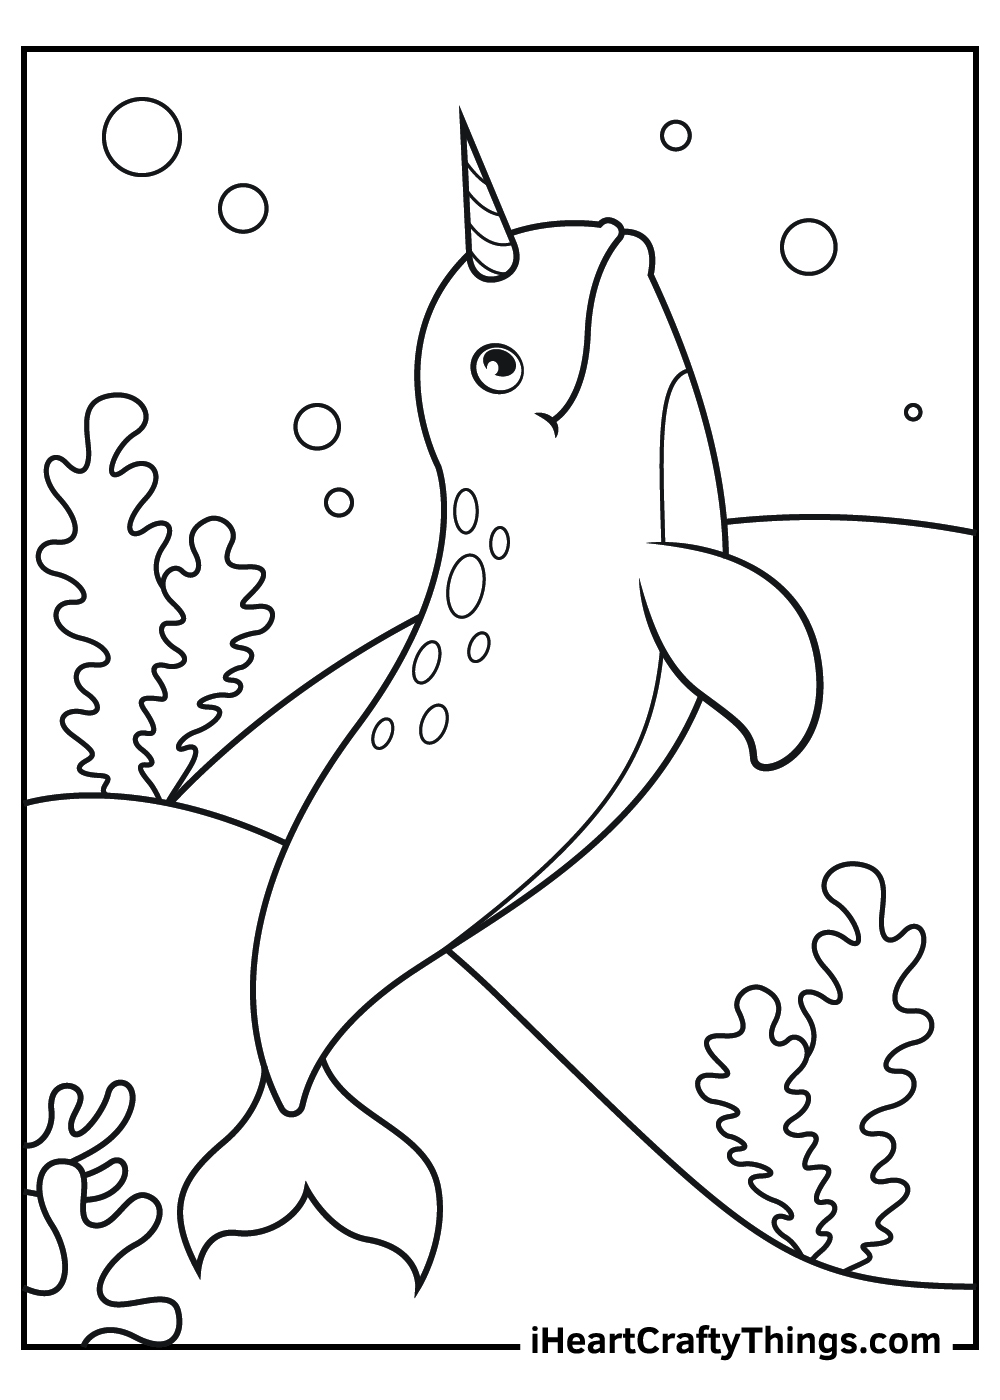 Narwhal coloring pages free printables